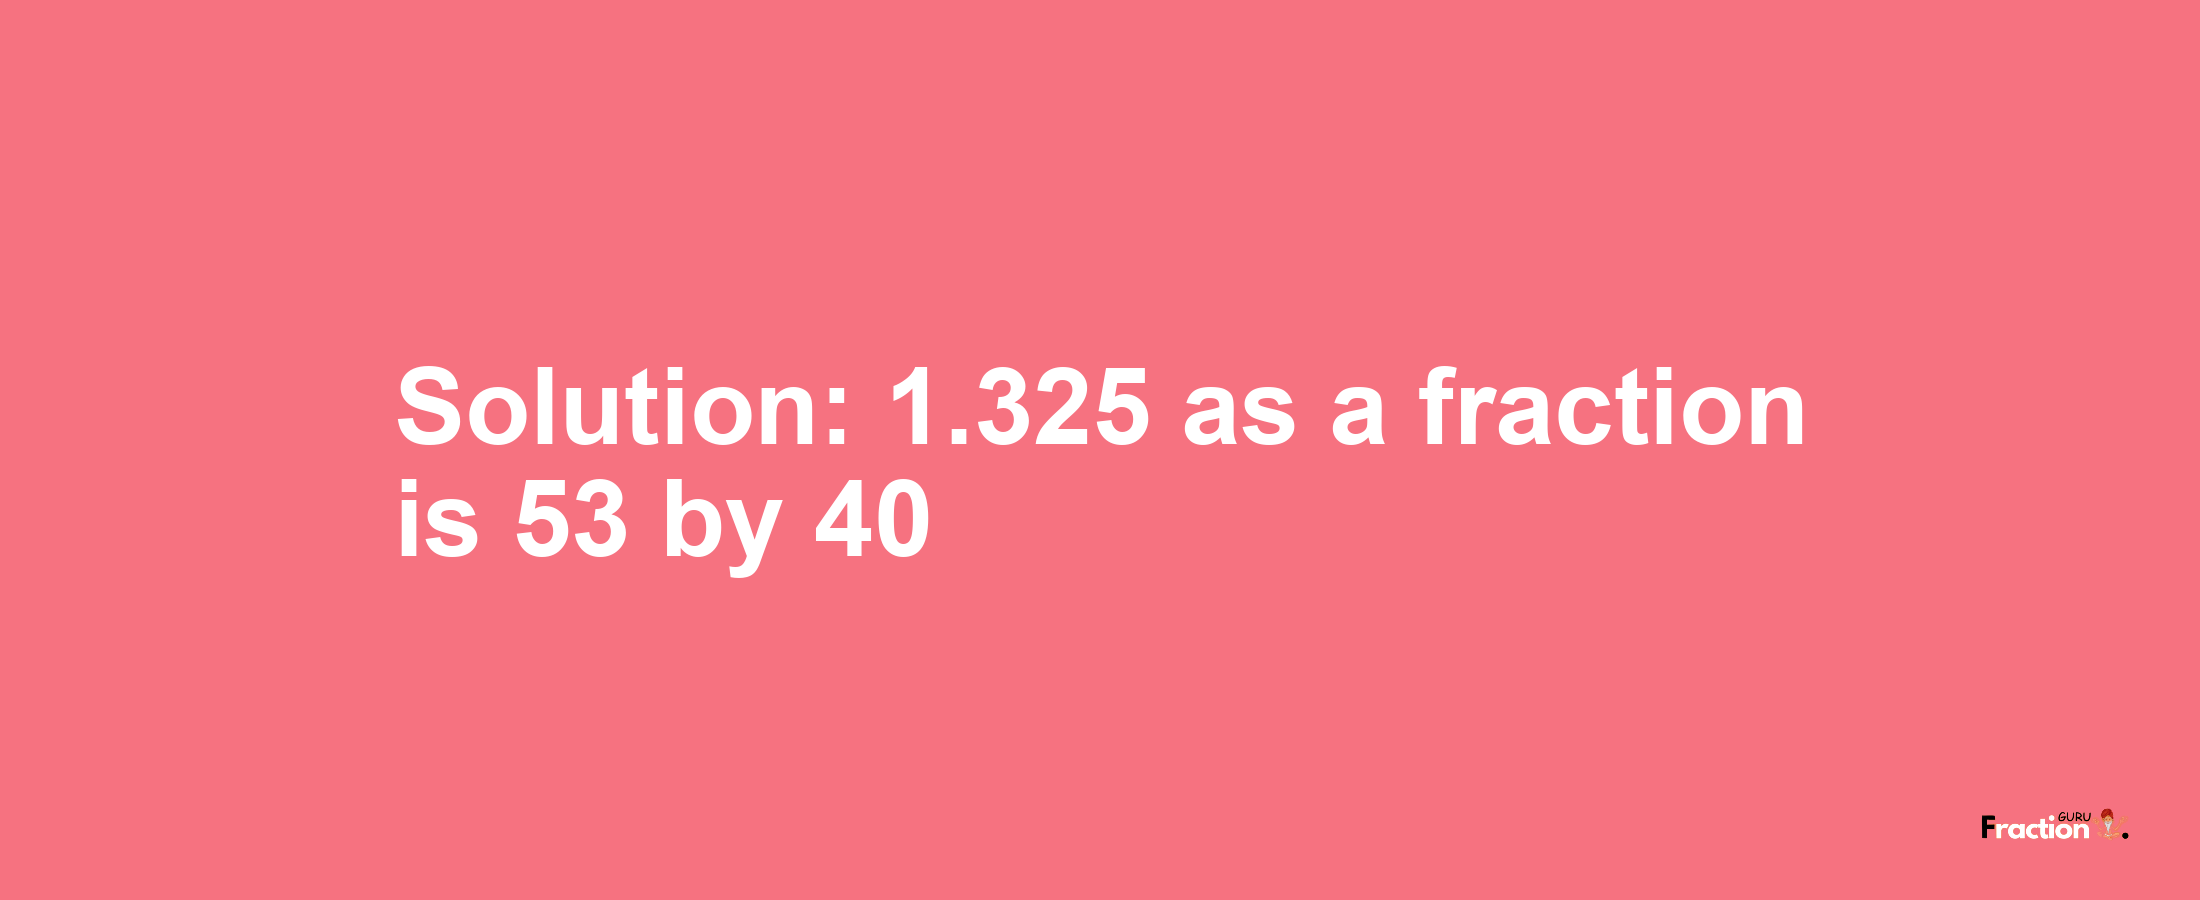 Solution:1.325 as a fraction is 53/40